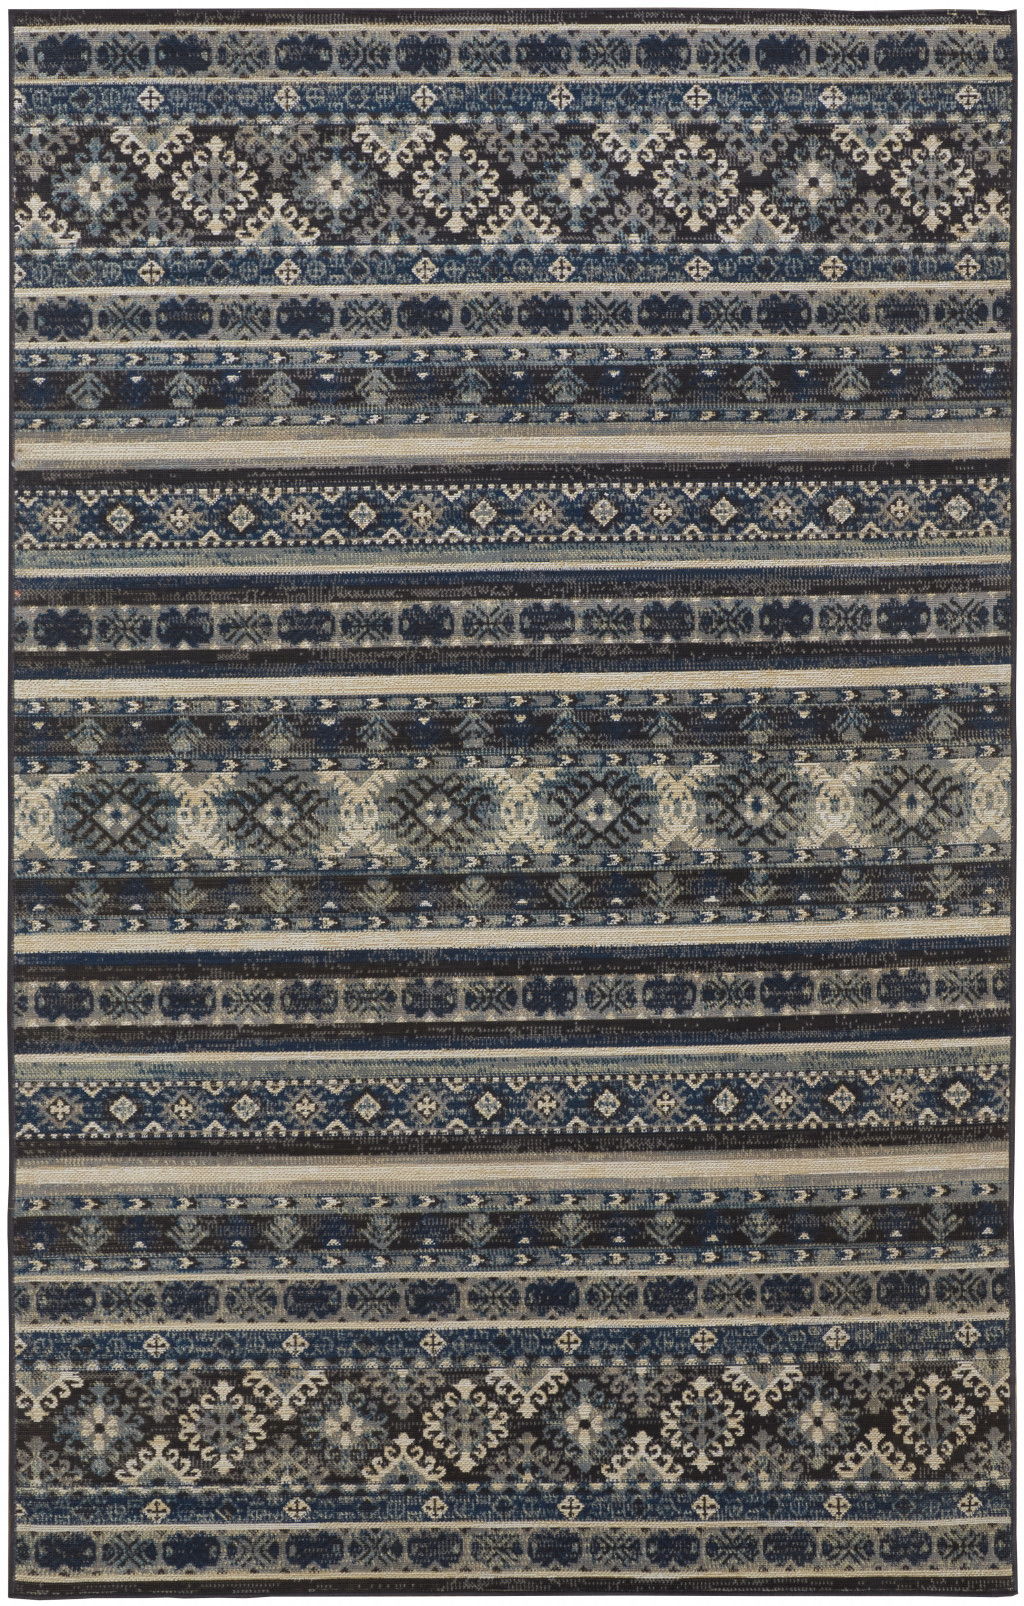 Geometric Power Loom Distressed Stain Resistant Area Rug - Blue Tan And Black - 2' X 3'